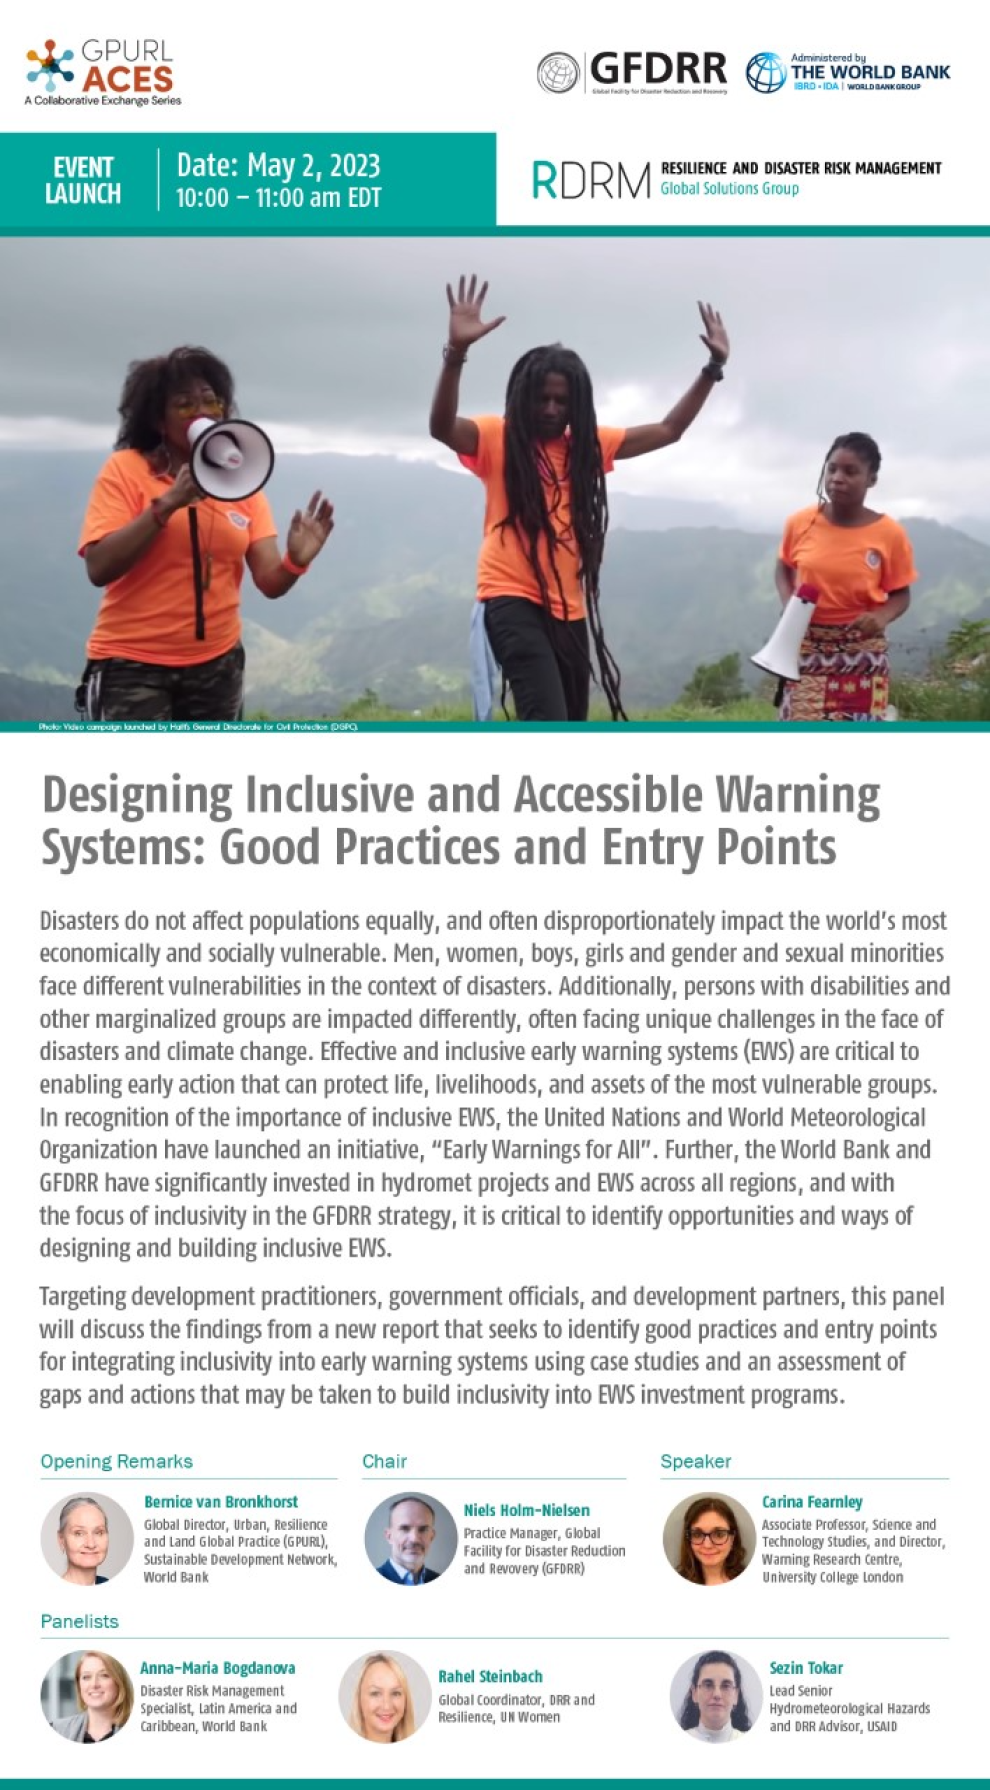 Designing Inclusive and Accessible Warning Systems: Good Practices and Entry Points